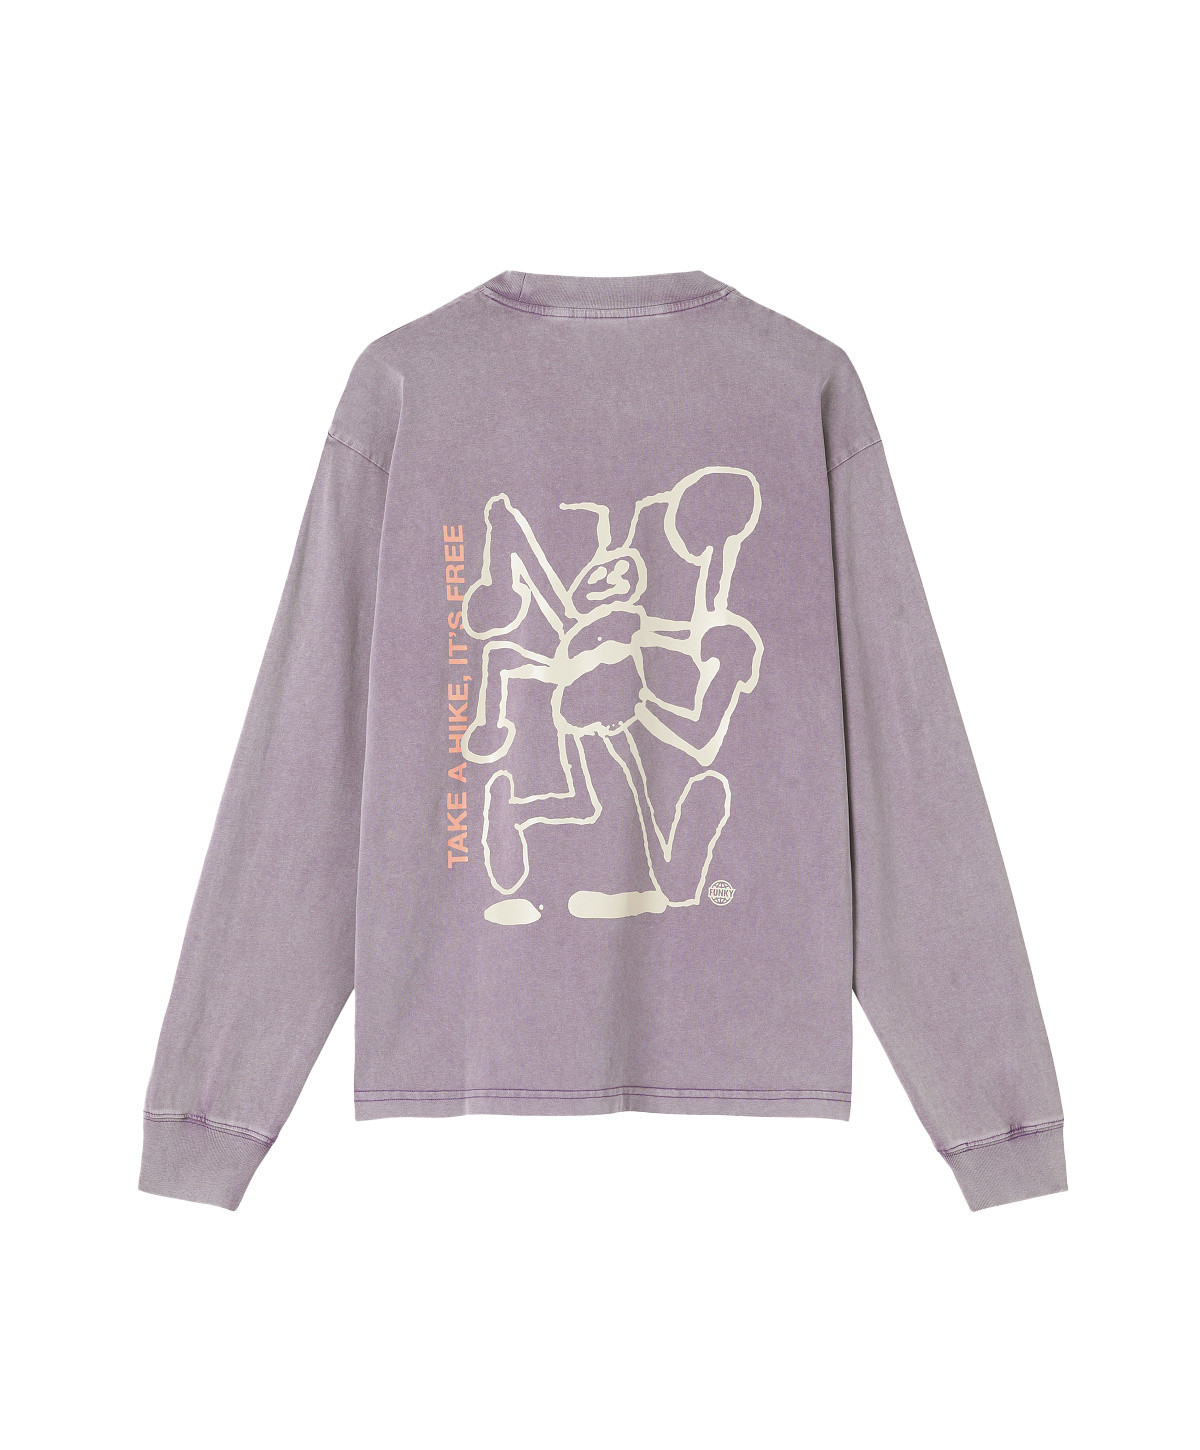 Funky - Crew-neck sweater with washed effect print, Purple Lilac, large image number 1